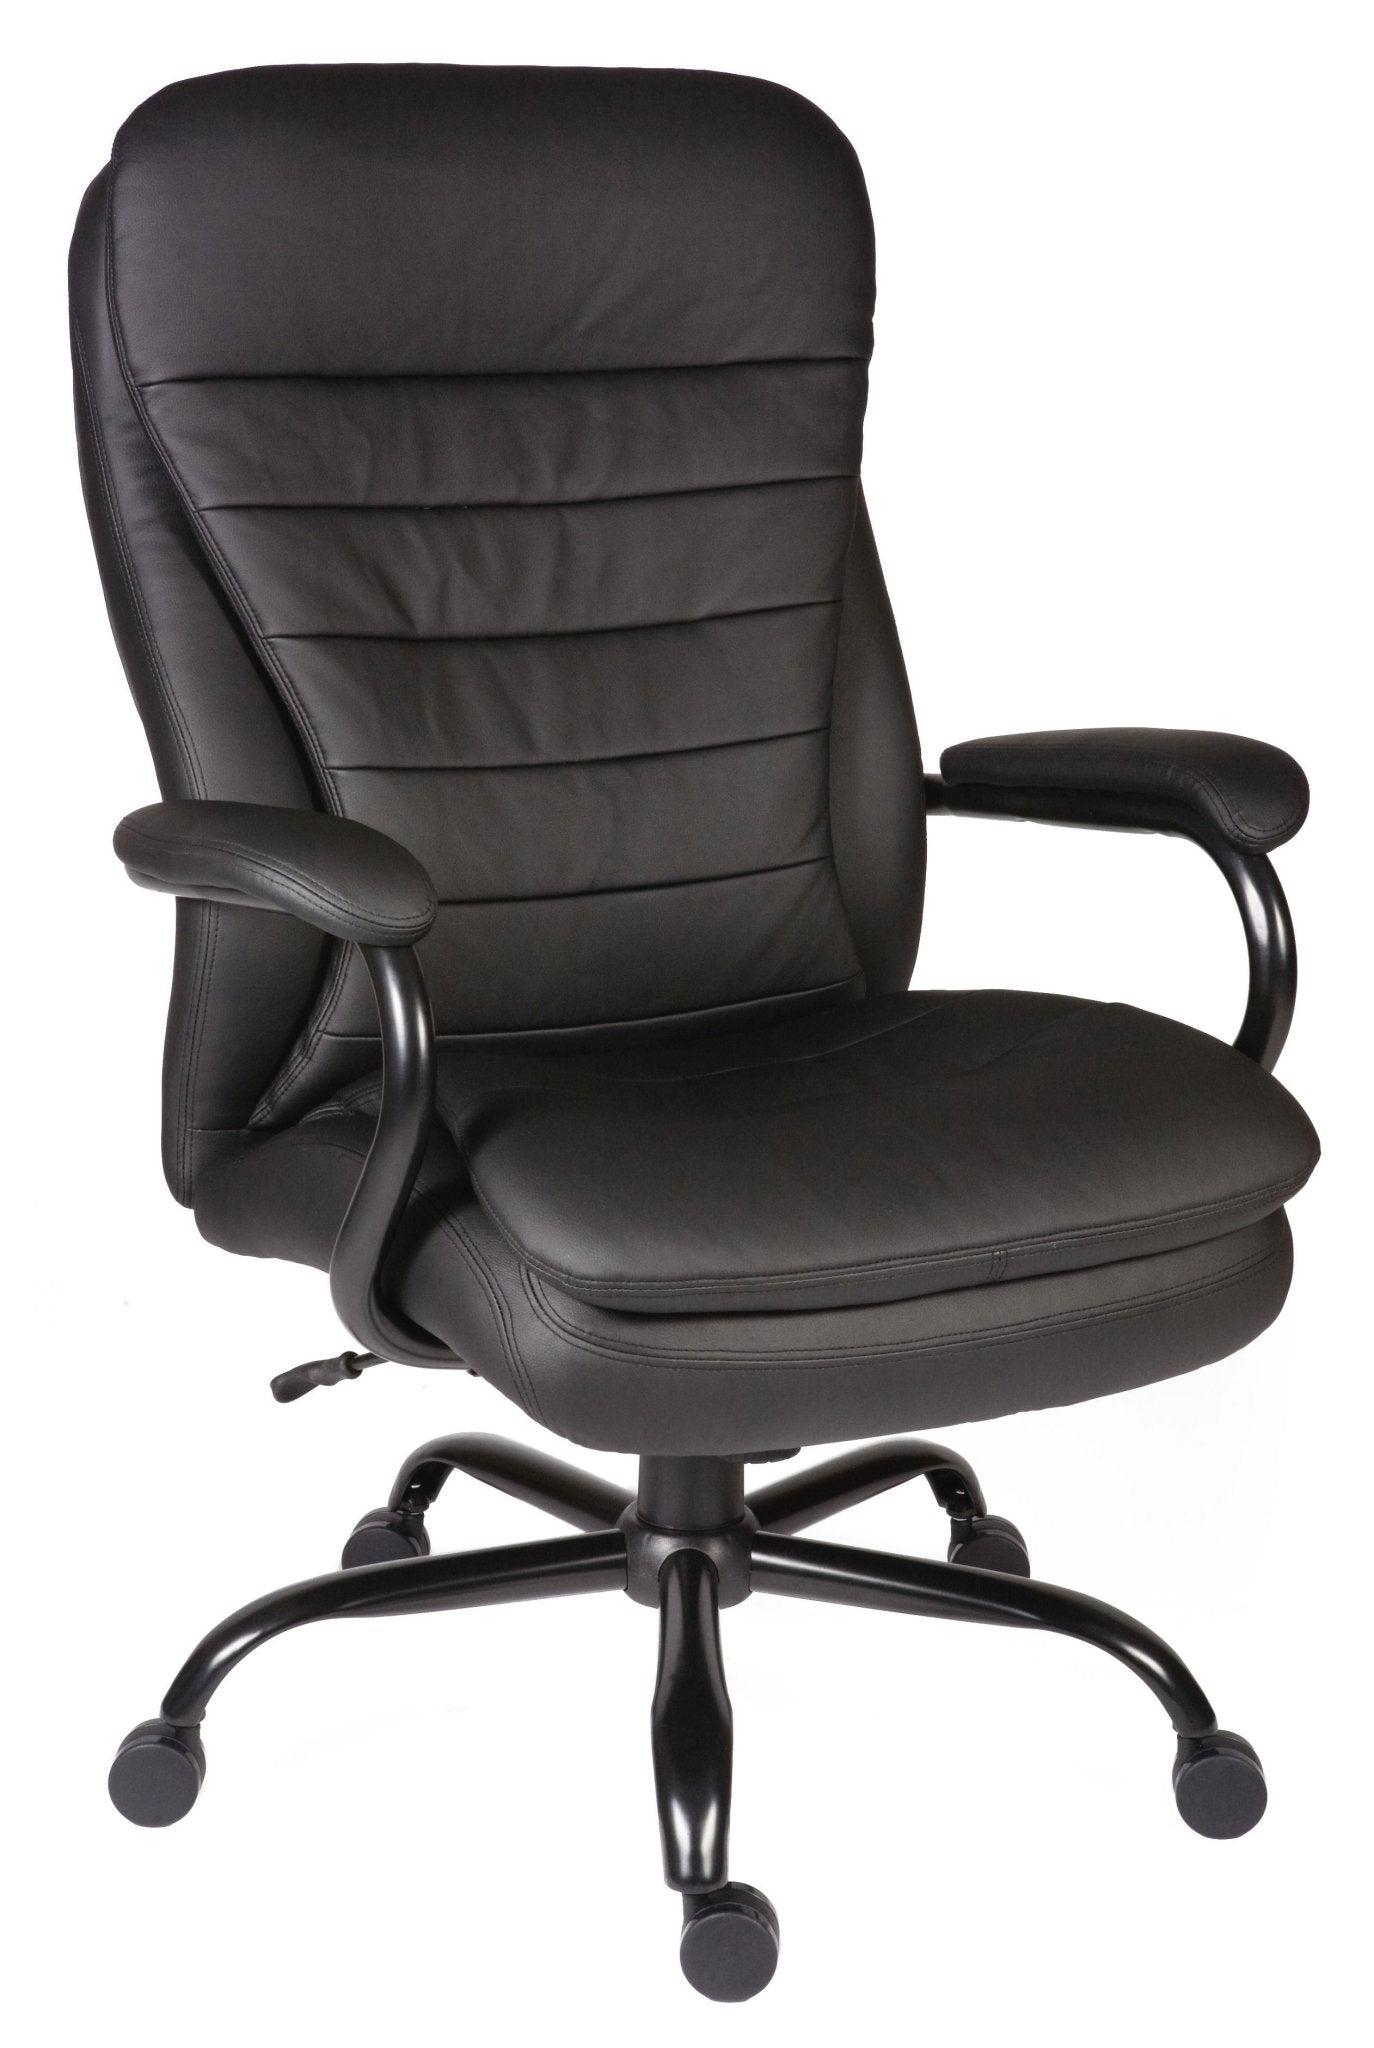 Goliath leather office chair - image 1